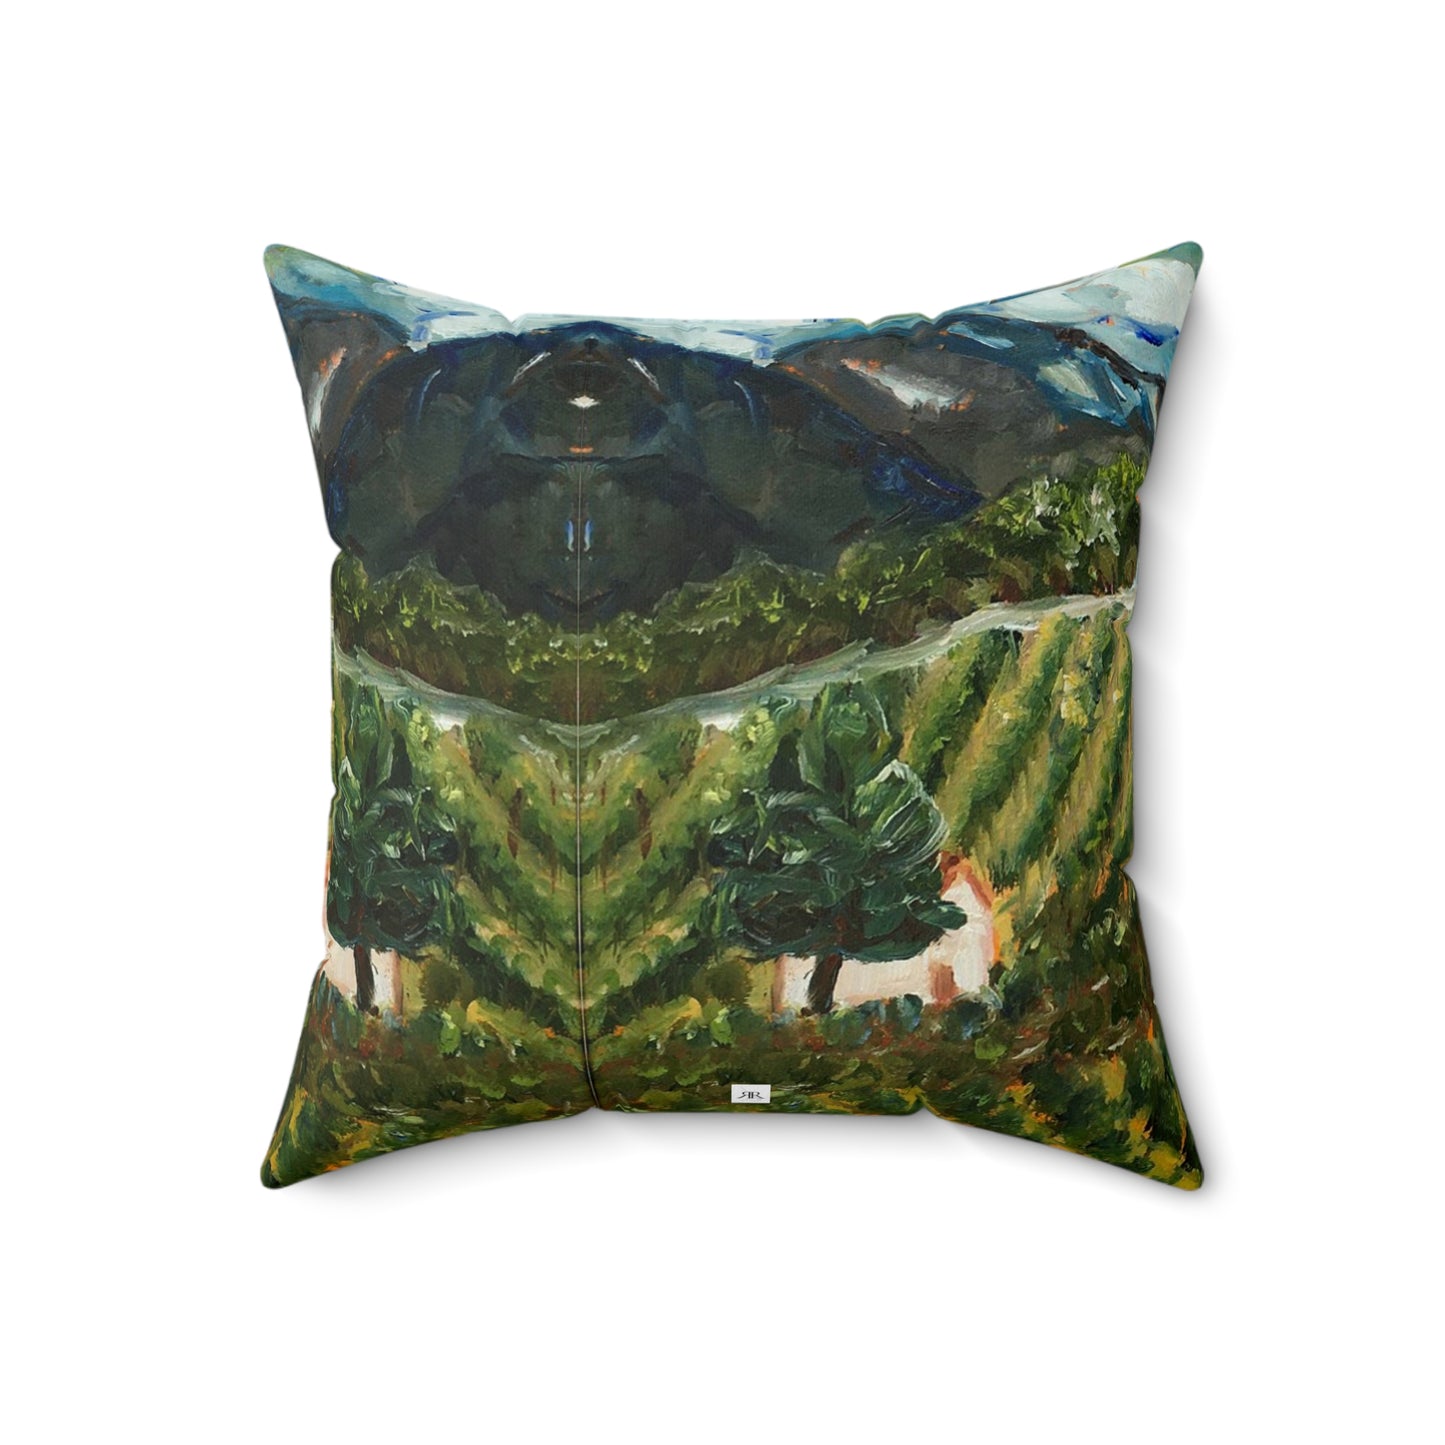 Avensole Indoor Spun Polyester Square Pillow